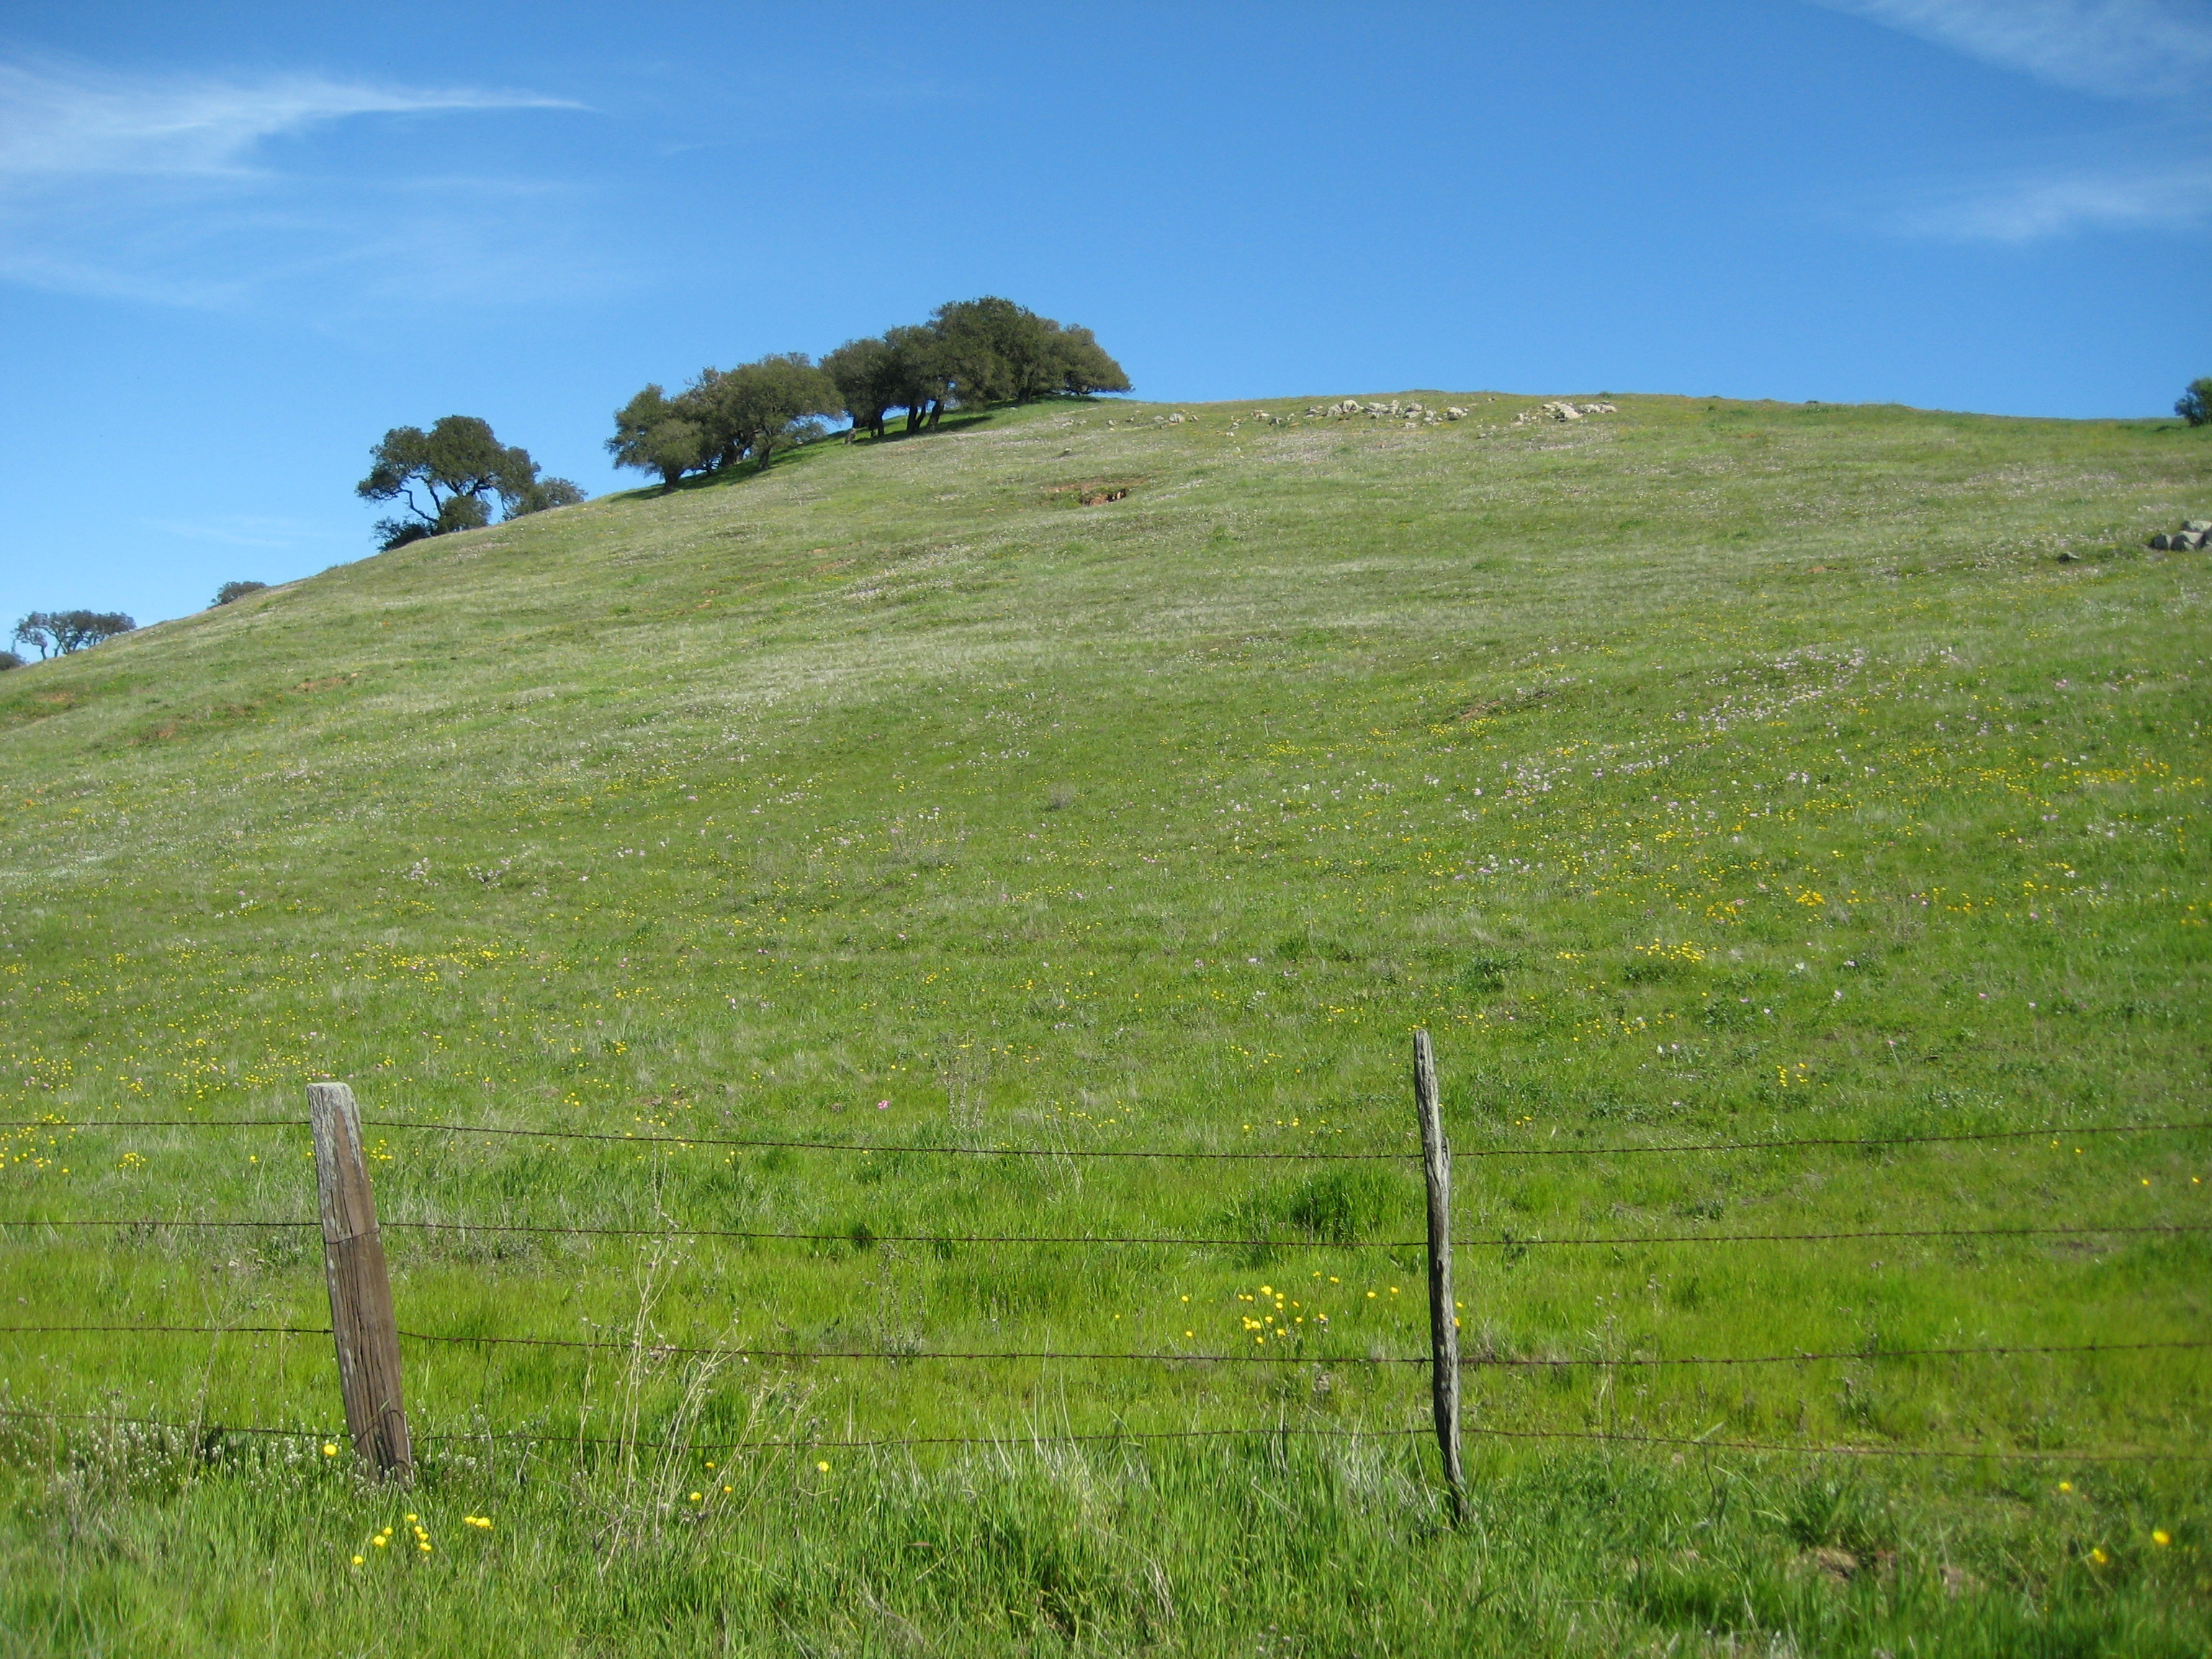 A flimsy fence somehow manages to contain a huge hill in Pacheco State Park, California.